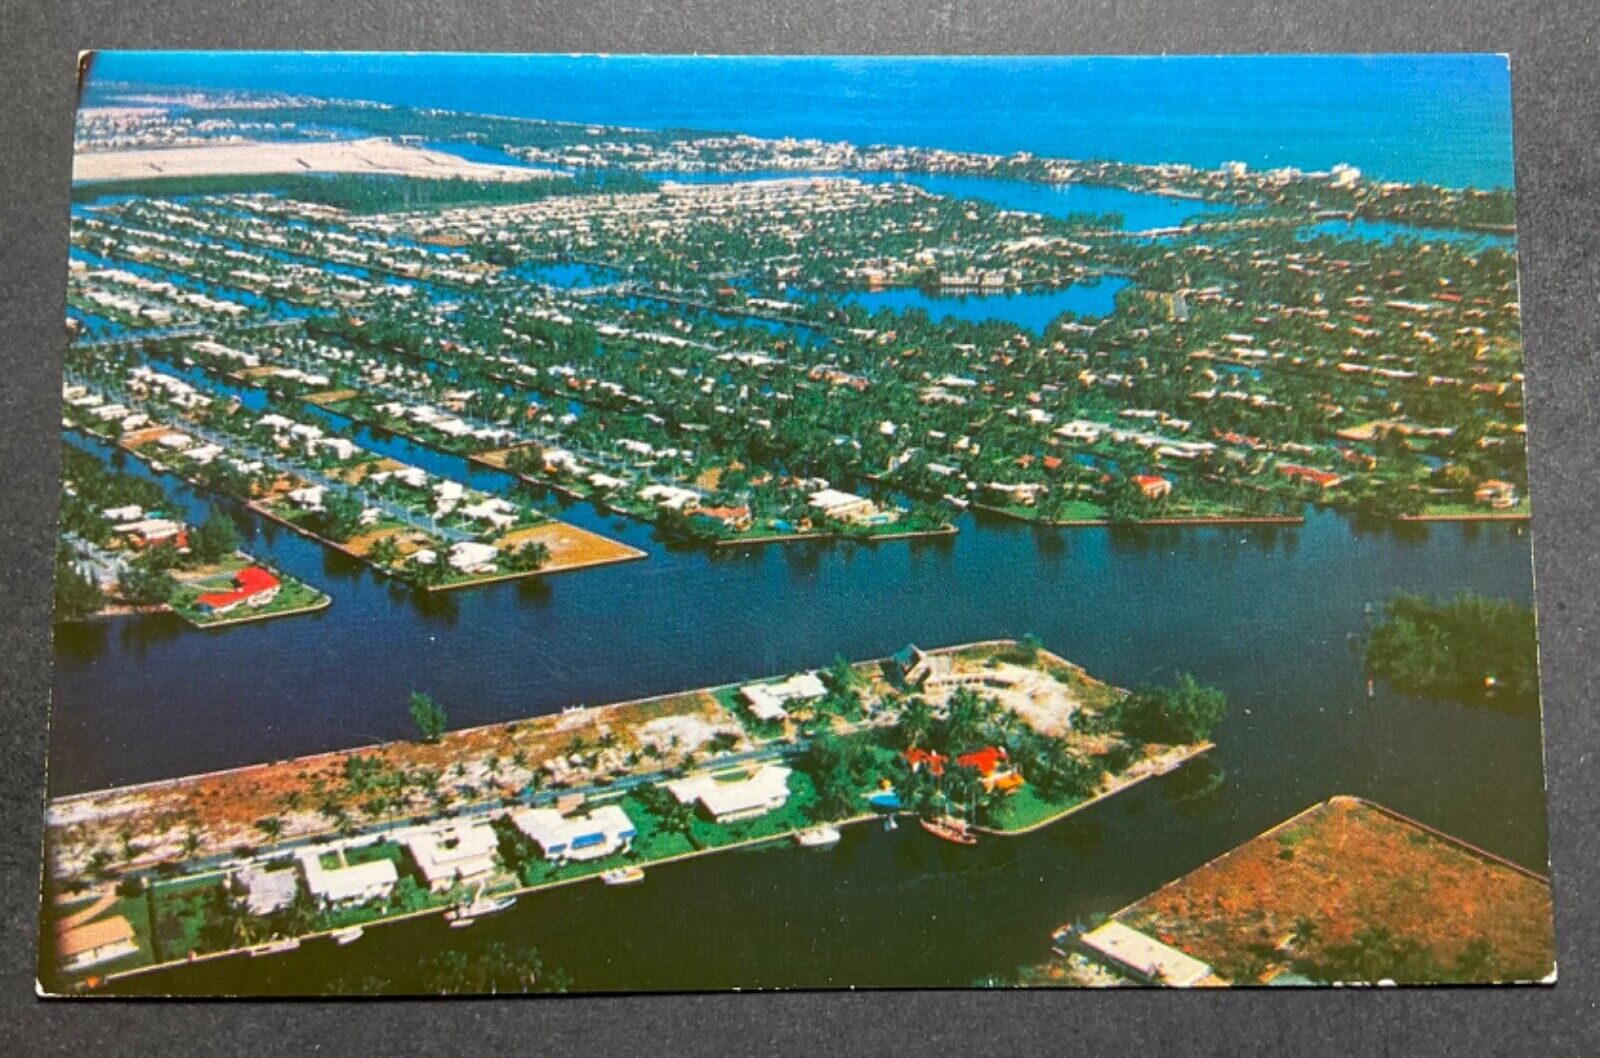 Ft Lauderdale Florida FL Postcard Airview of the Many Islands And Waterways